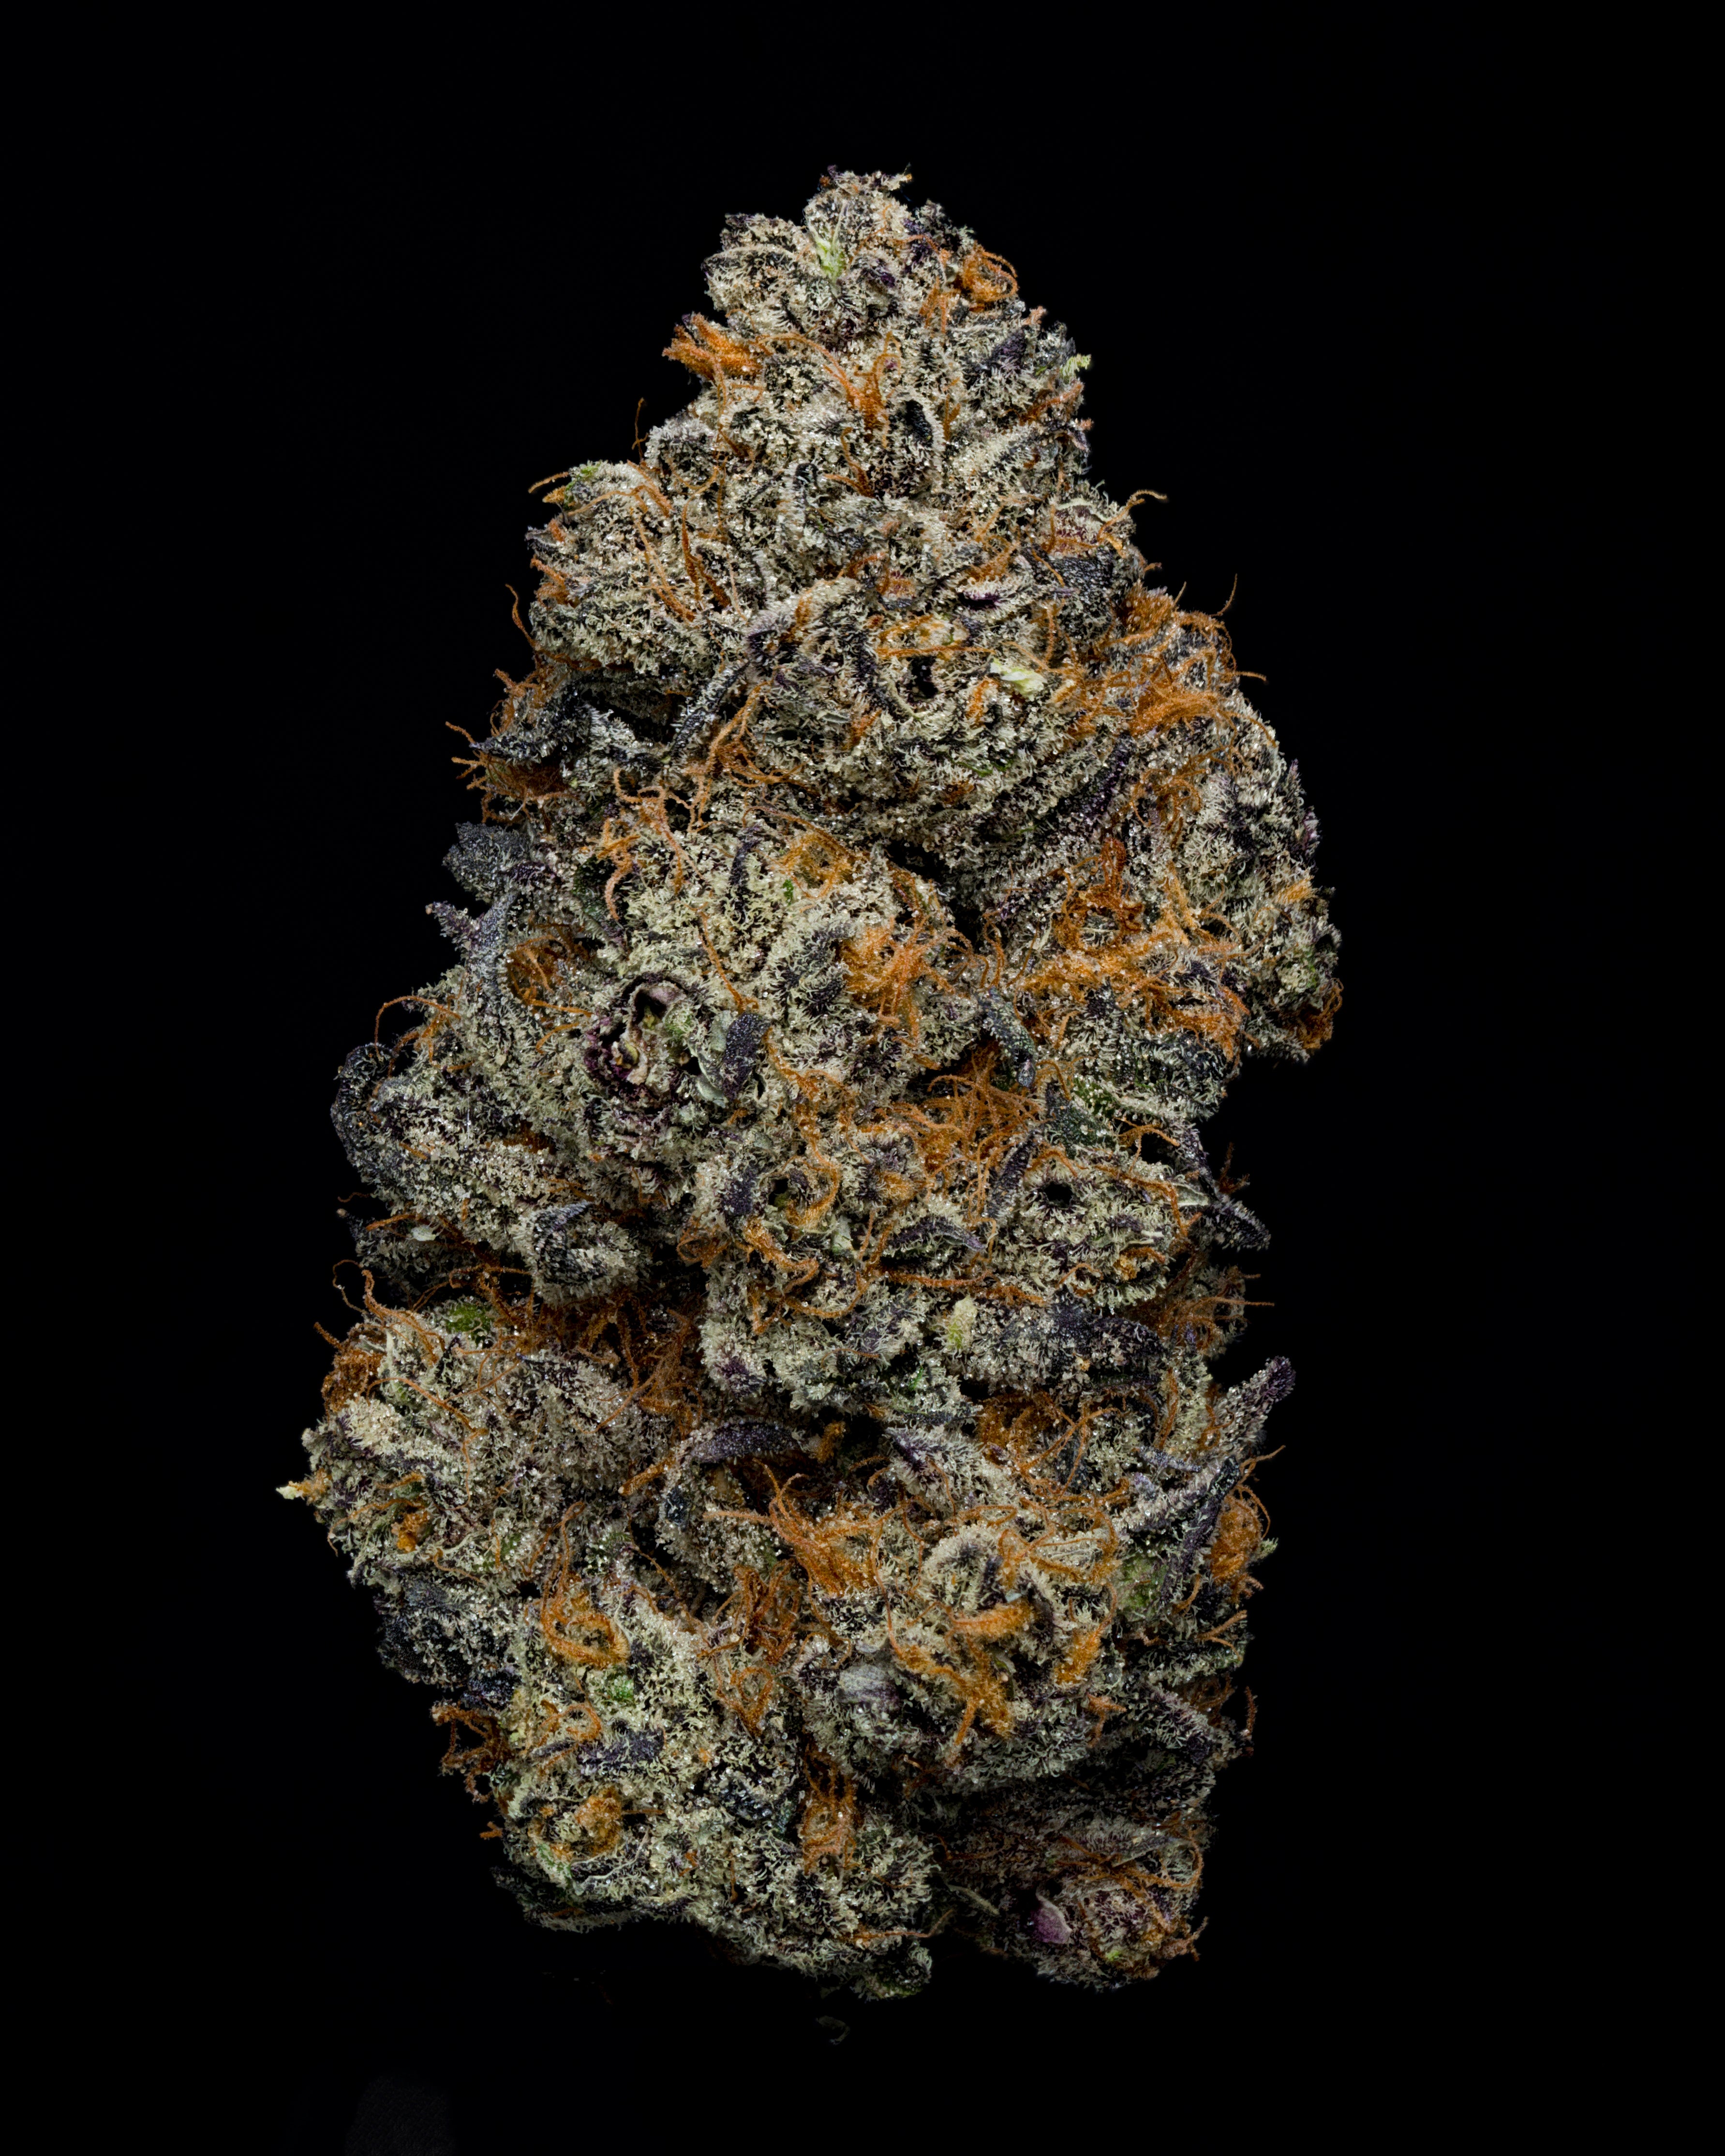 A nug of cannabis flower from the White Truffle strain stands against a black background.